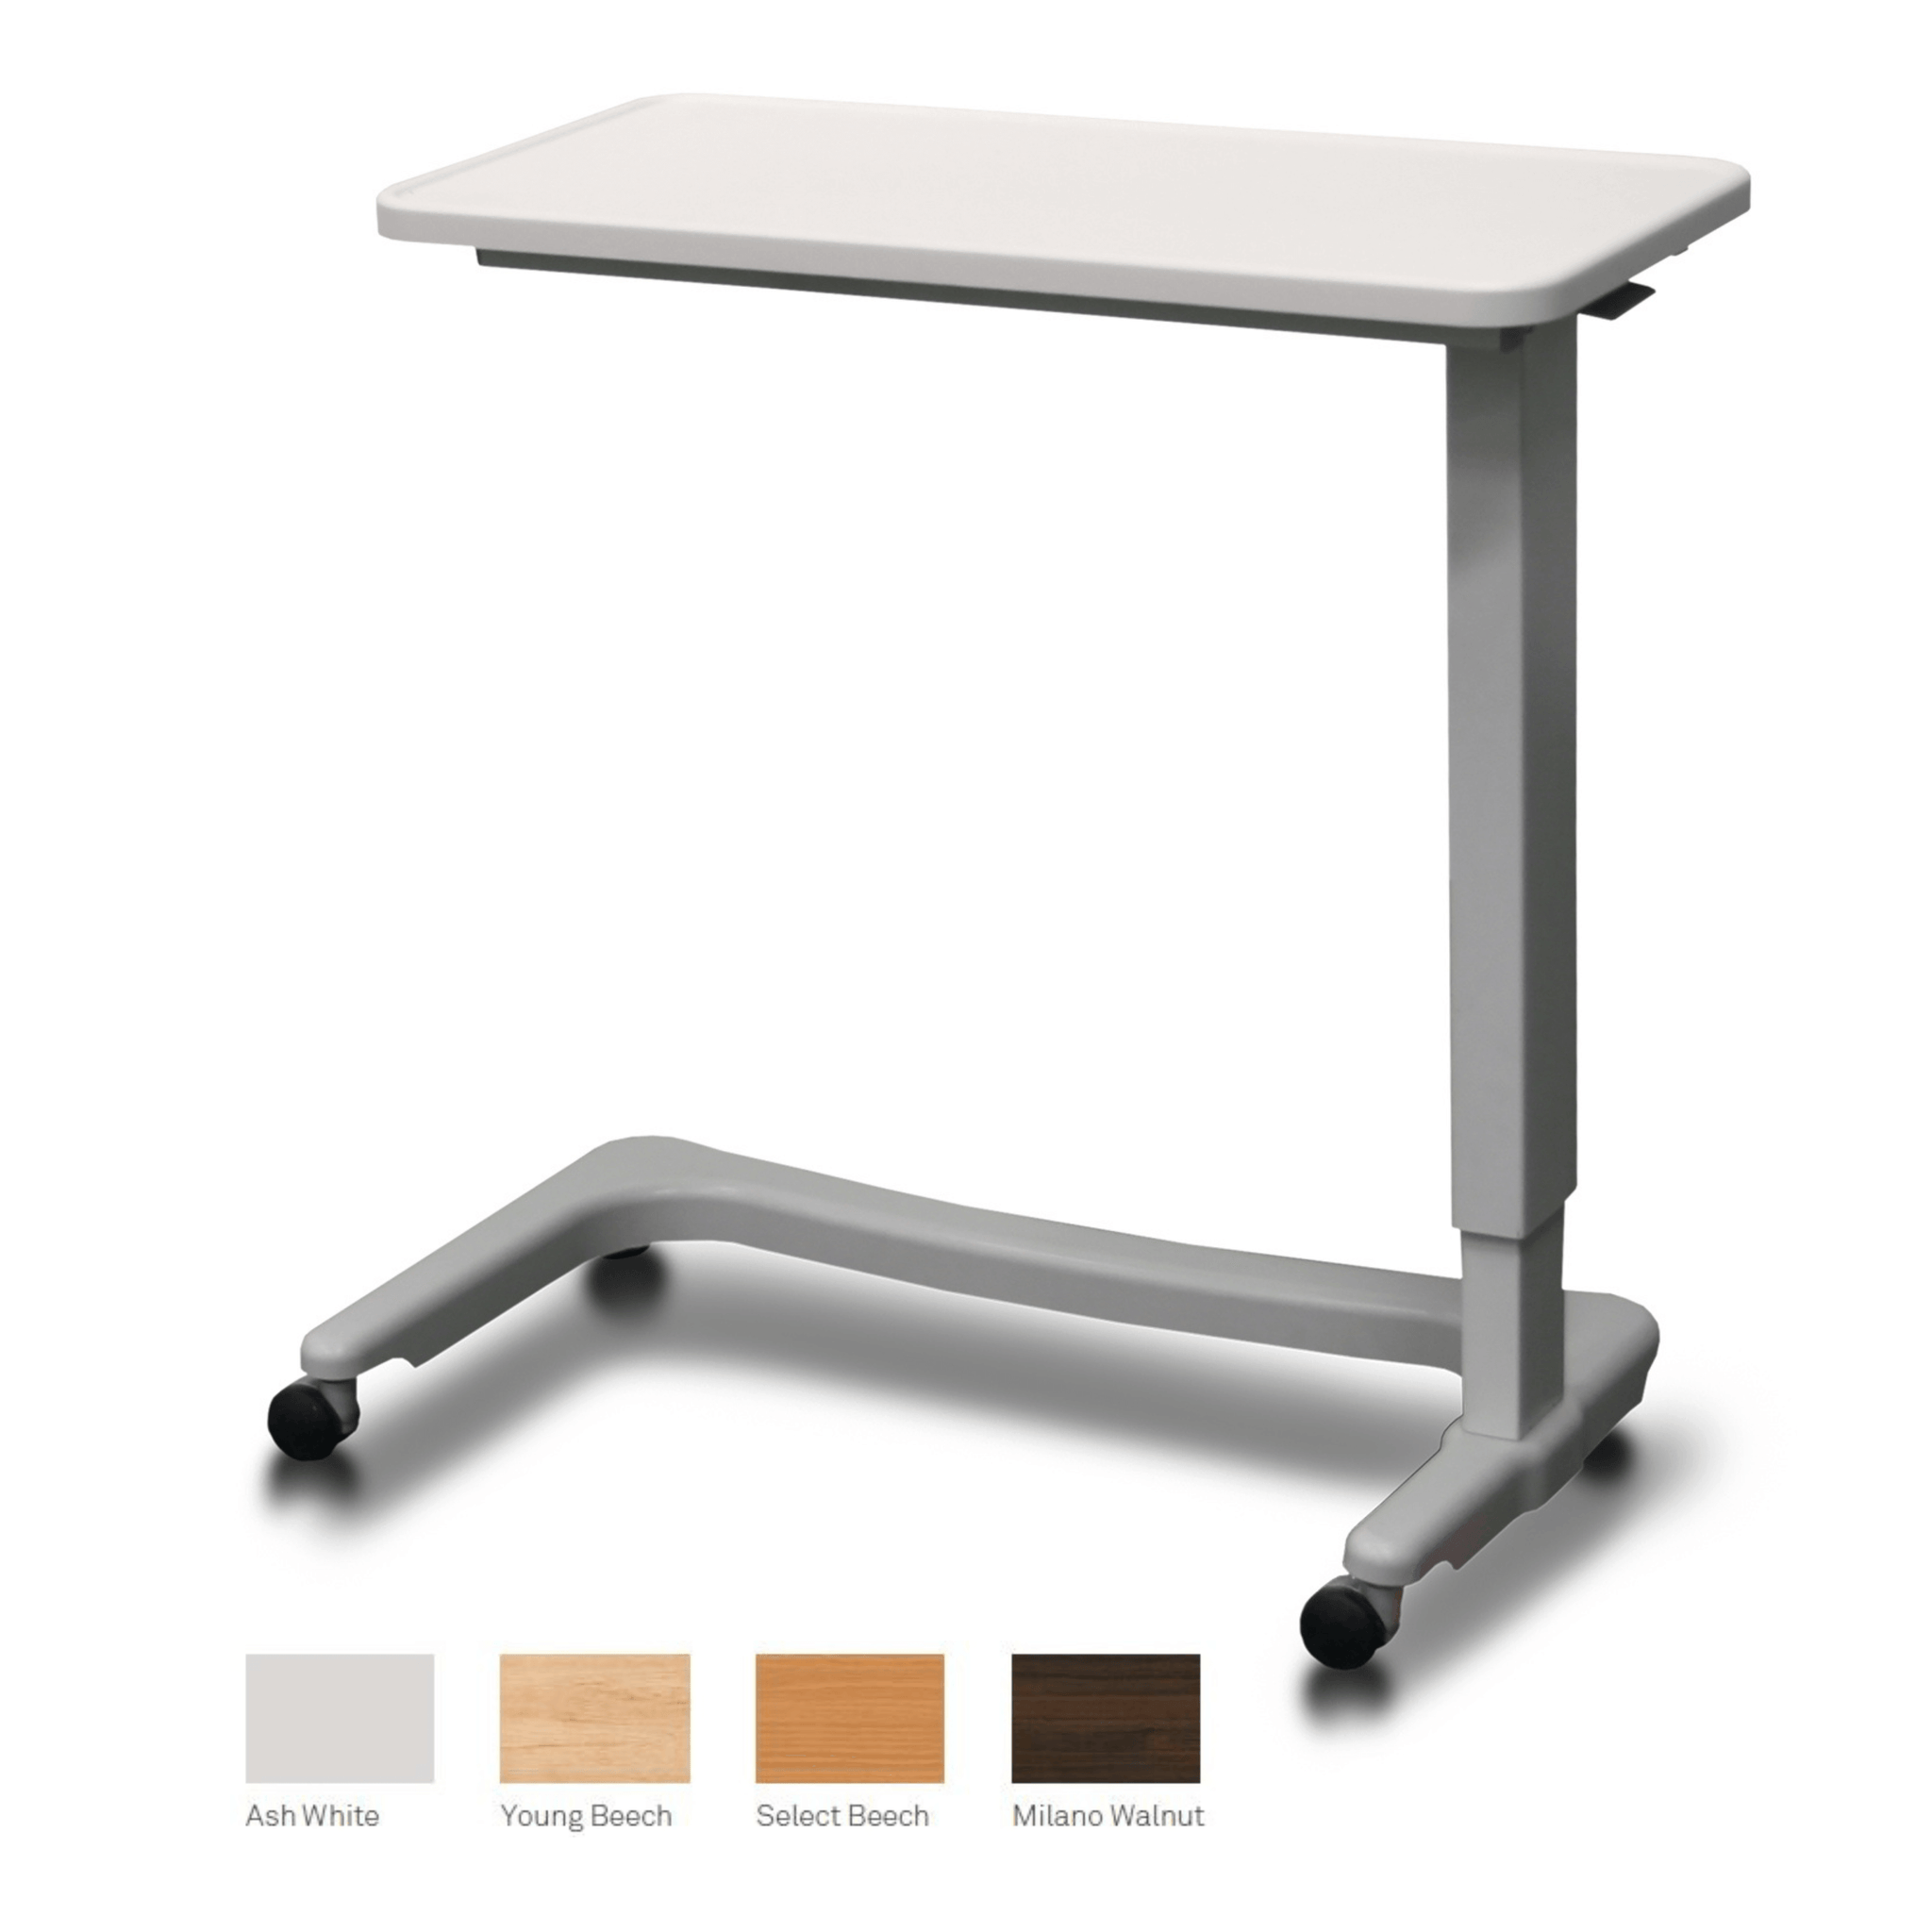 Fixed Top Overbed Table- Assisted Lift Height, Ash White - 2